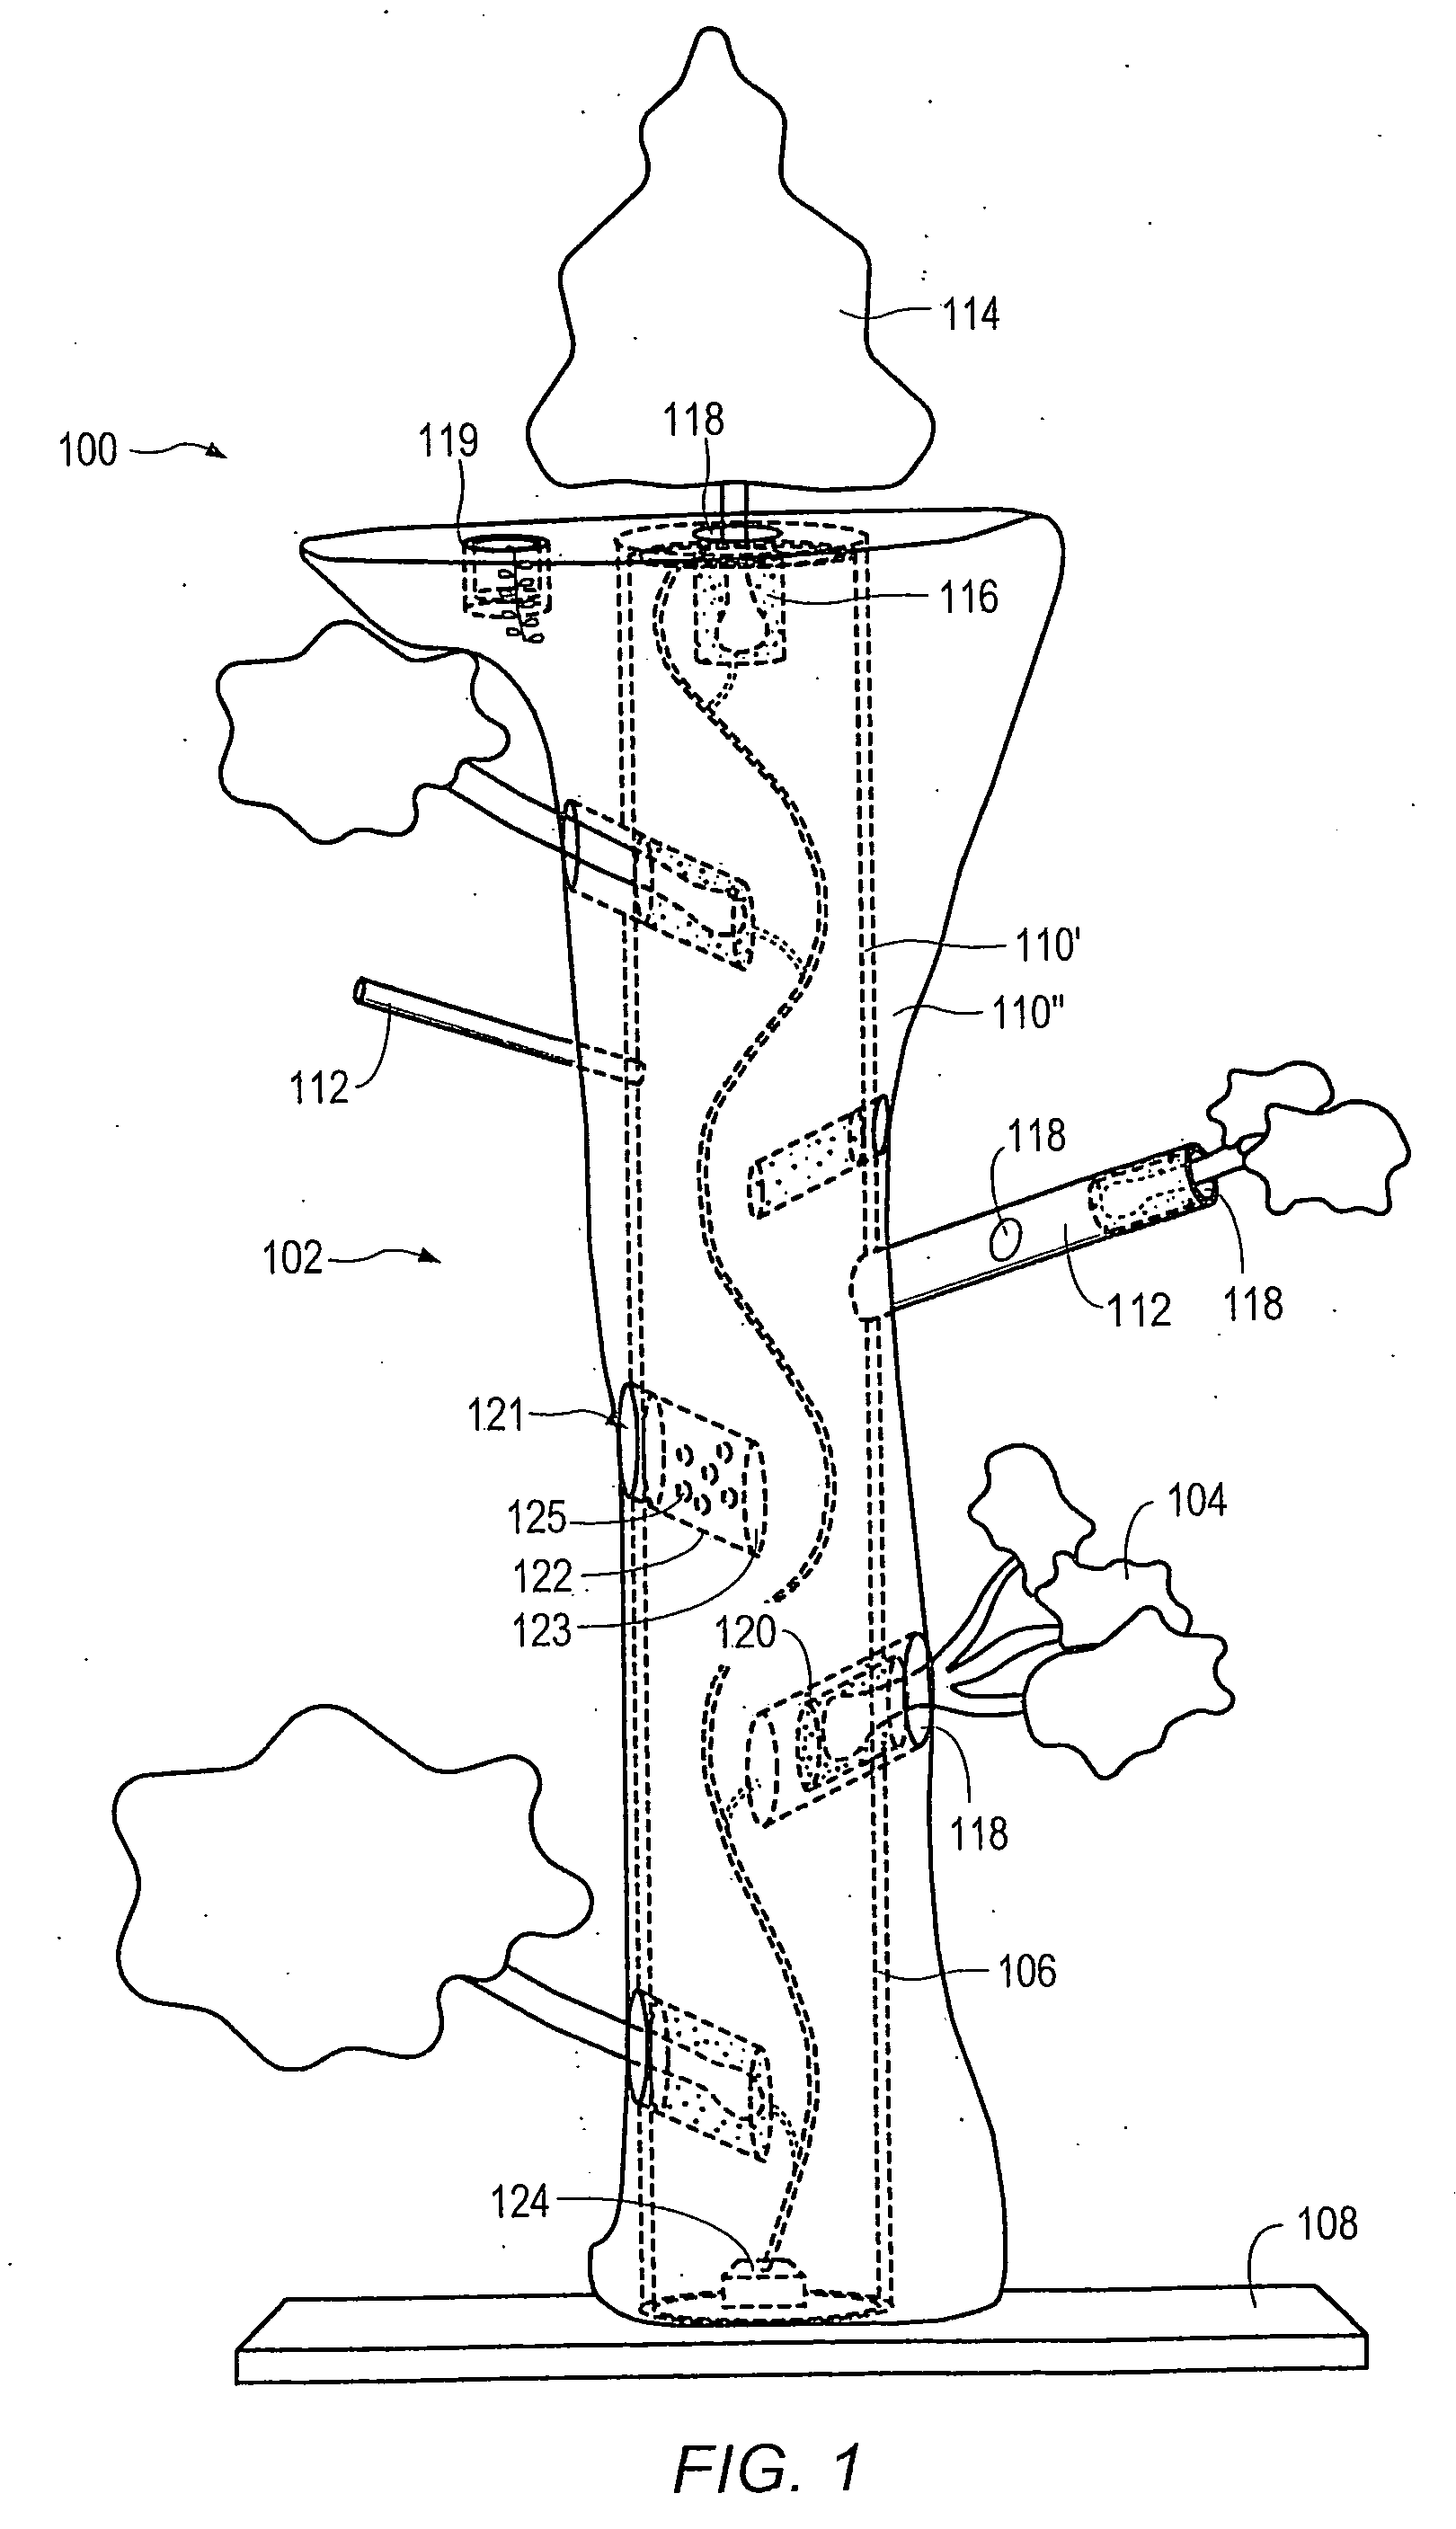 Tree with covering apparatus